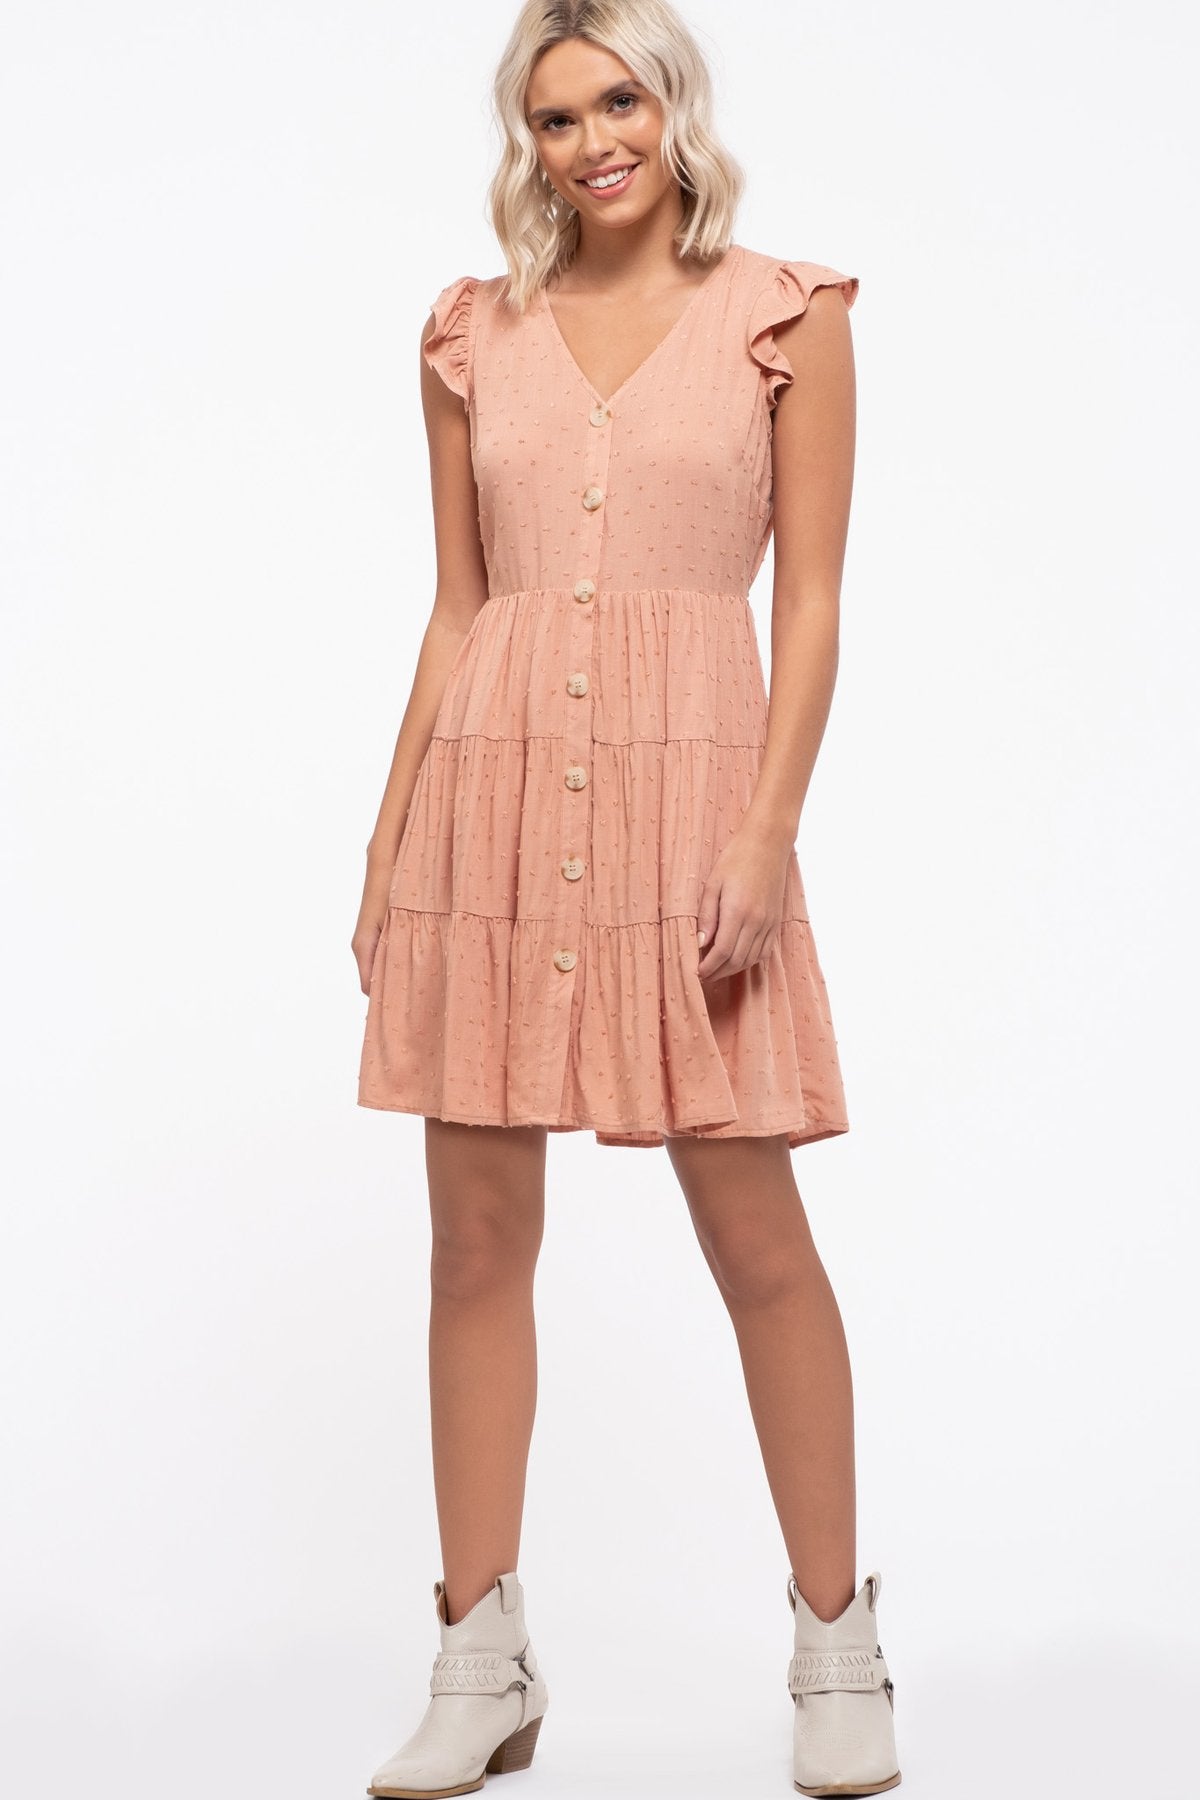 Share Your Love Dress In Dusty Peach